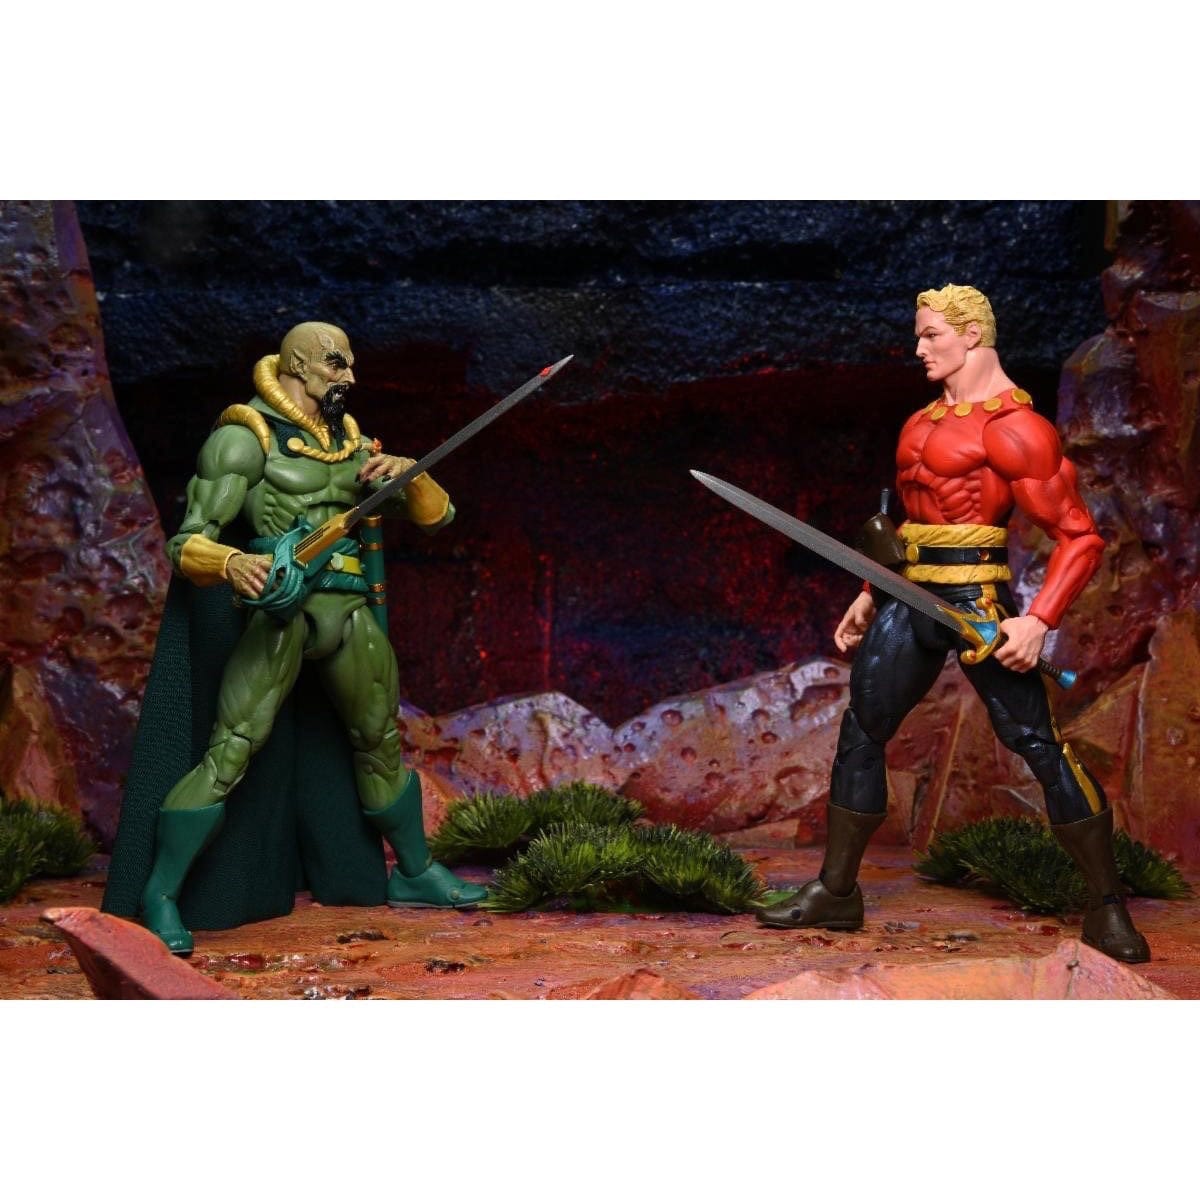 NECA King Features The Original Superheroes Ming the Merciless Action Figure